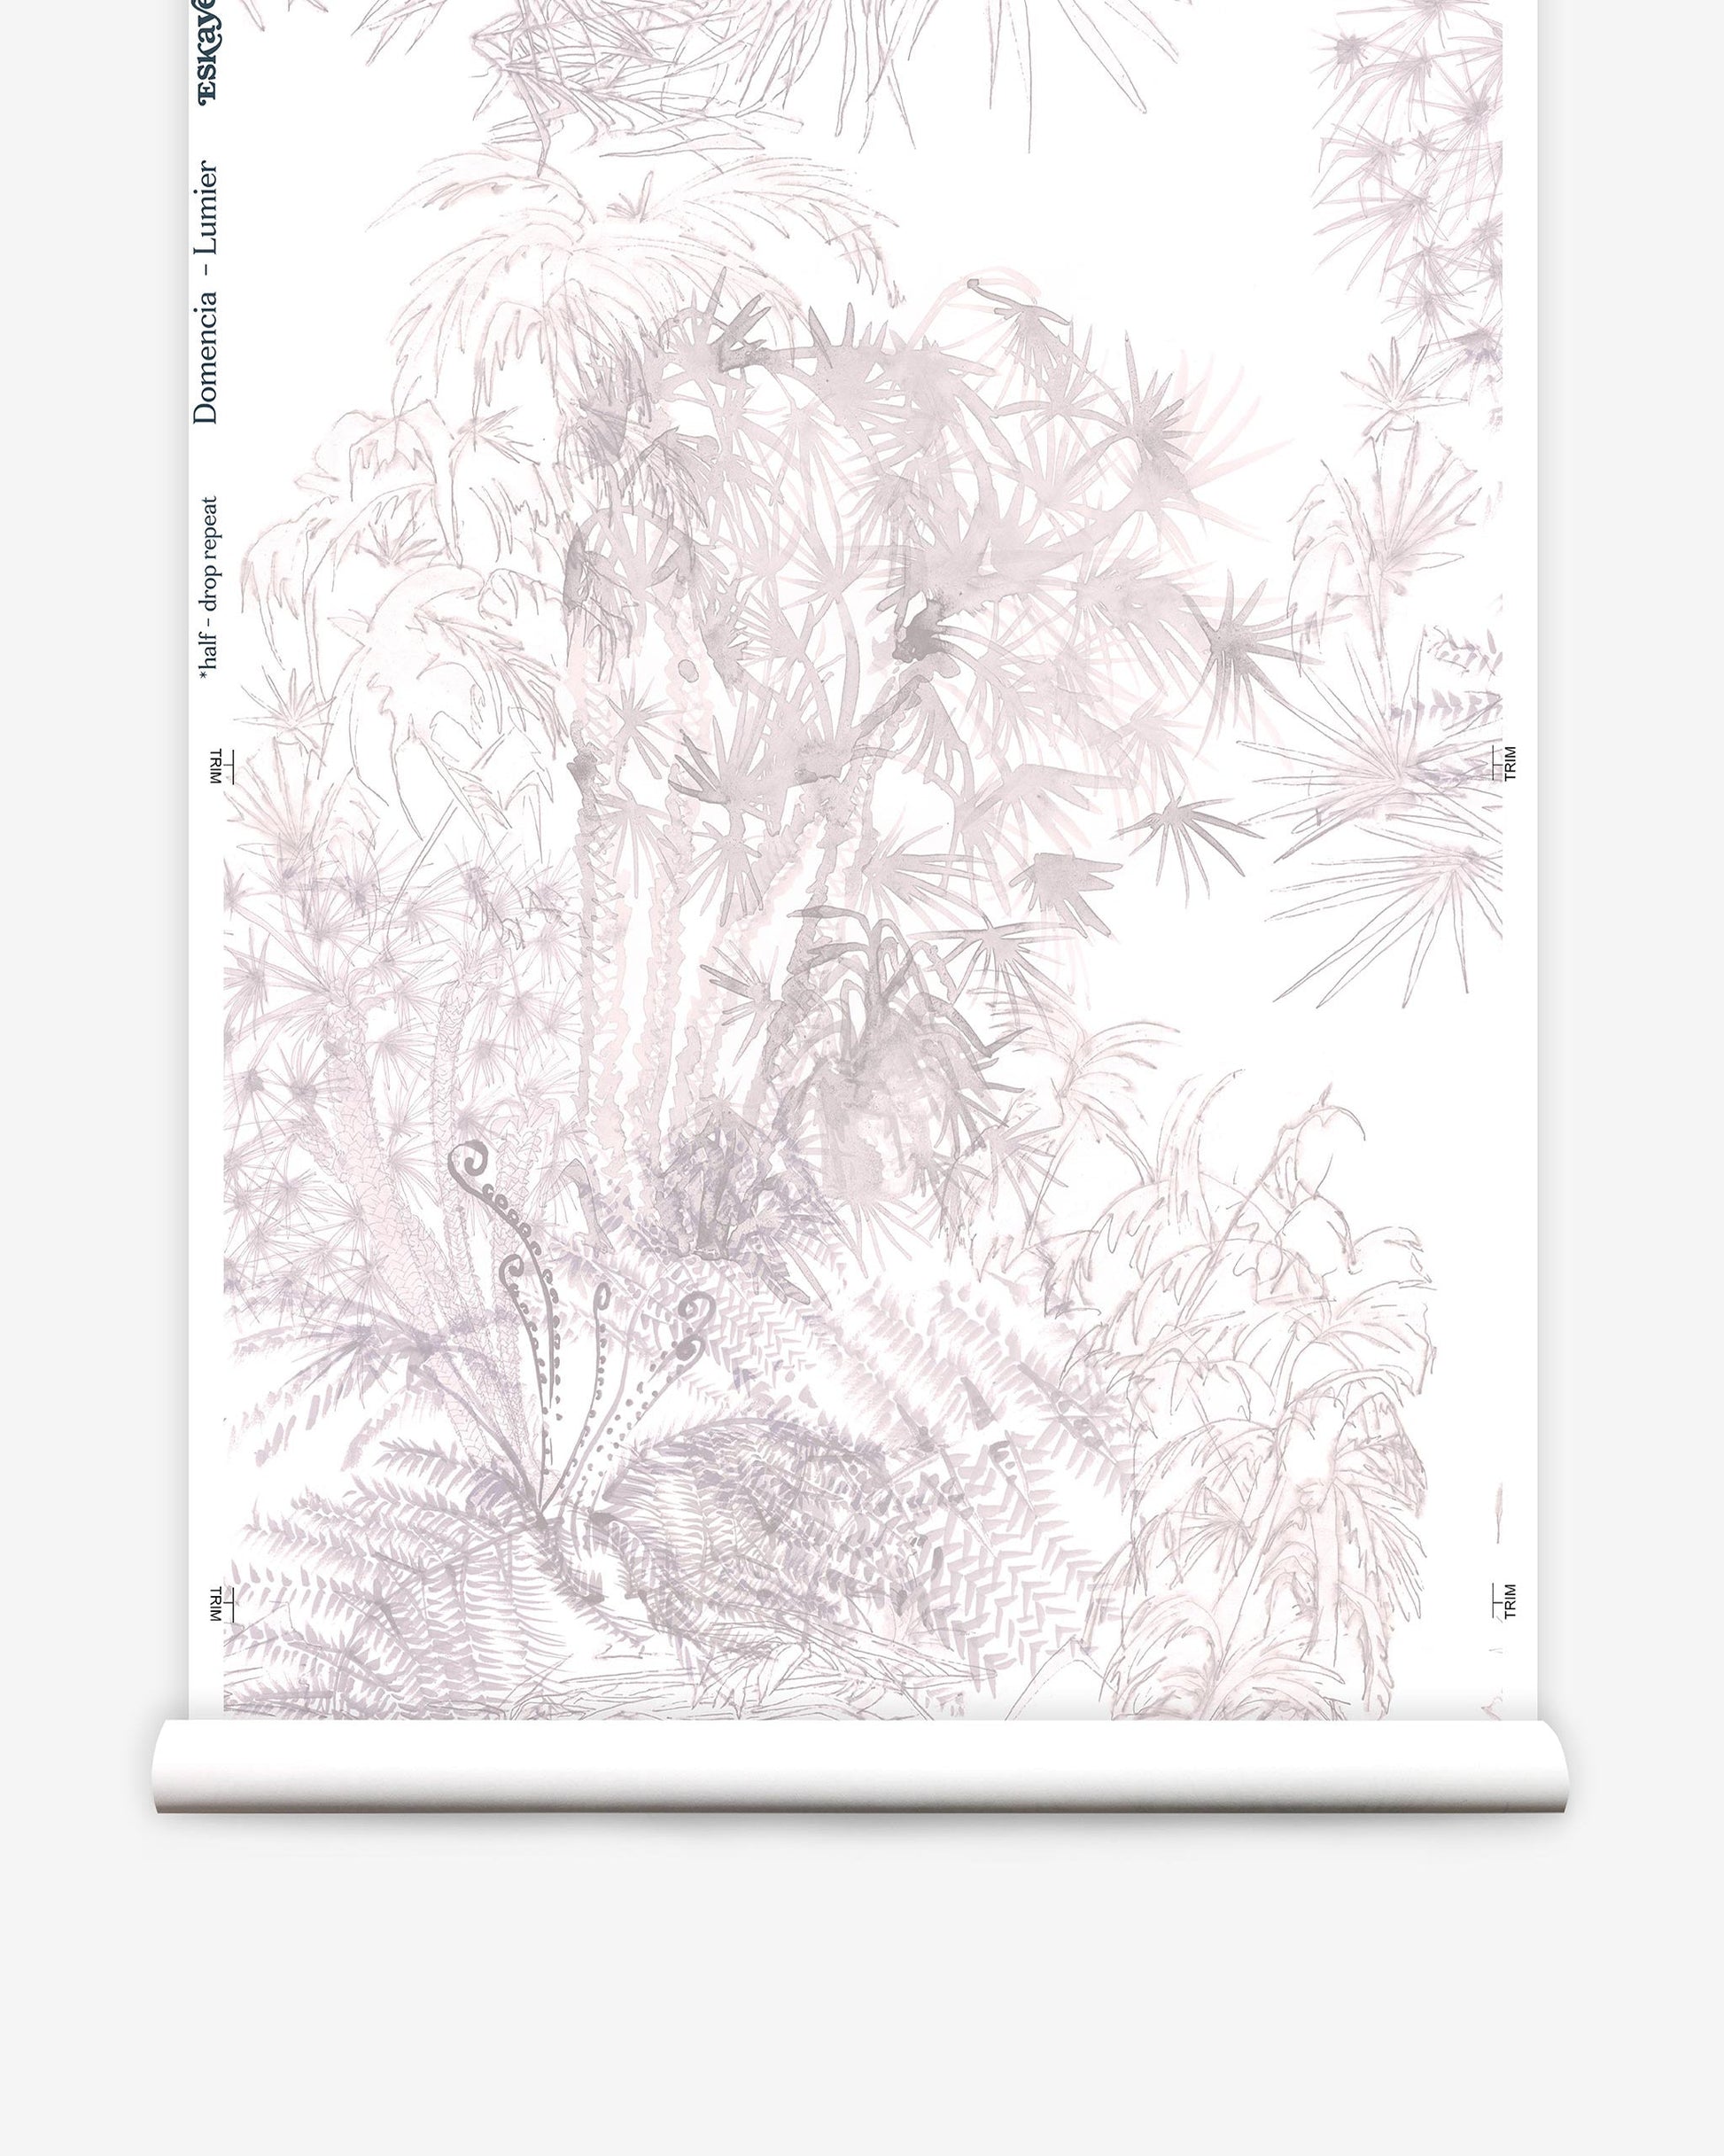 A roll of Domenica Wallpaper Lumier with an image of a tropical forest